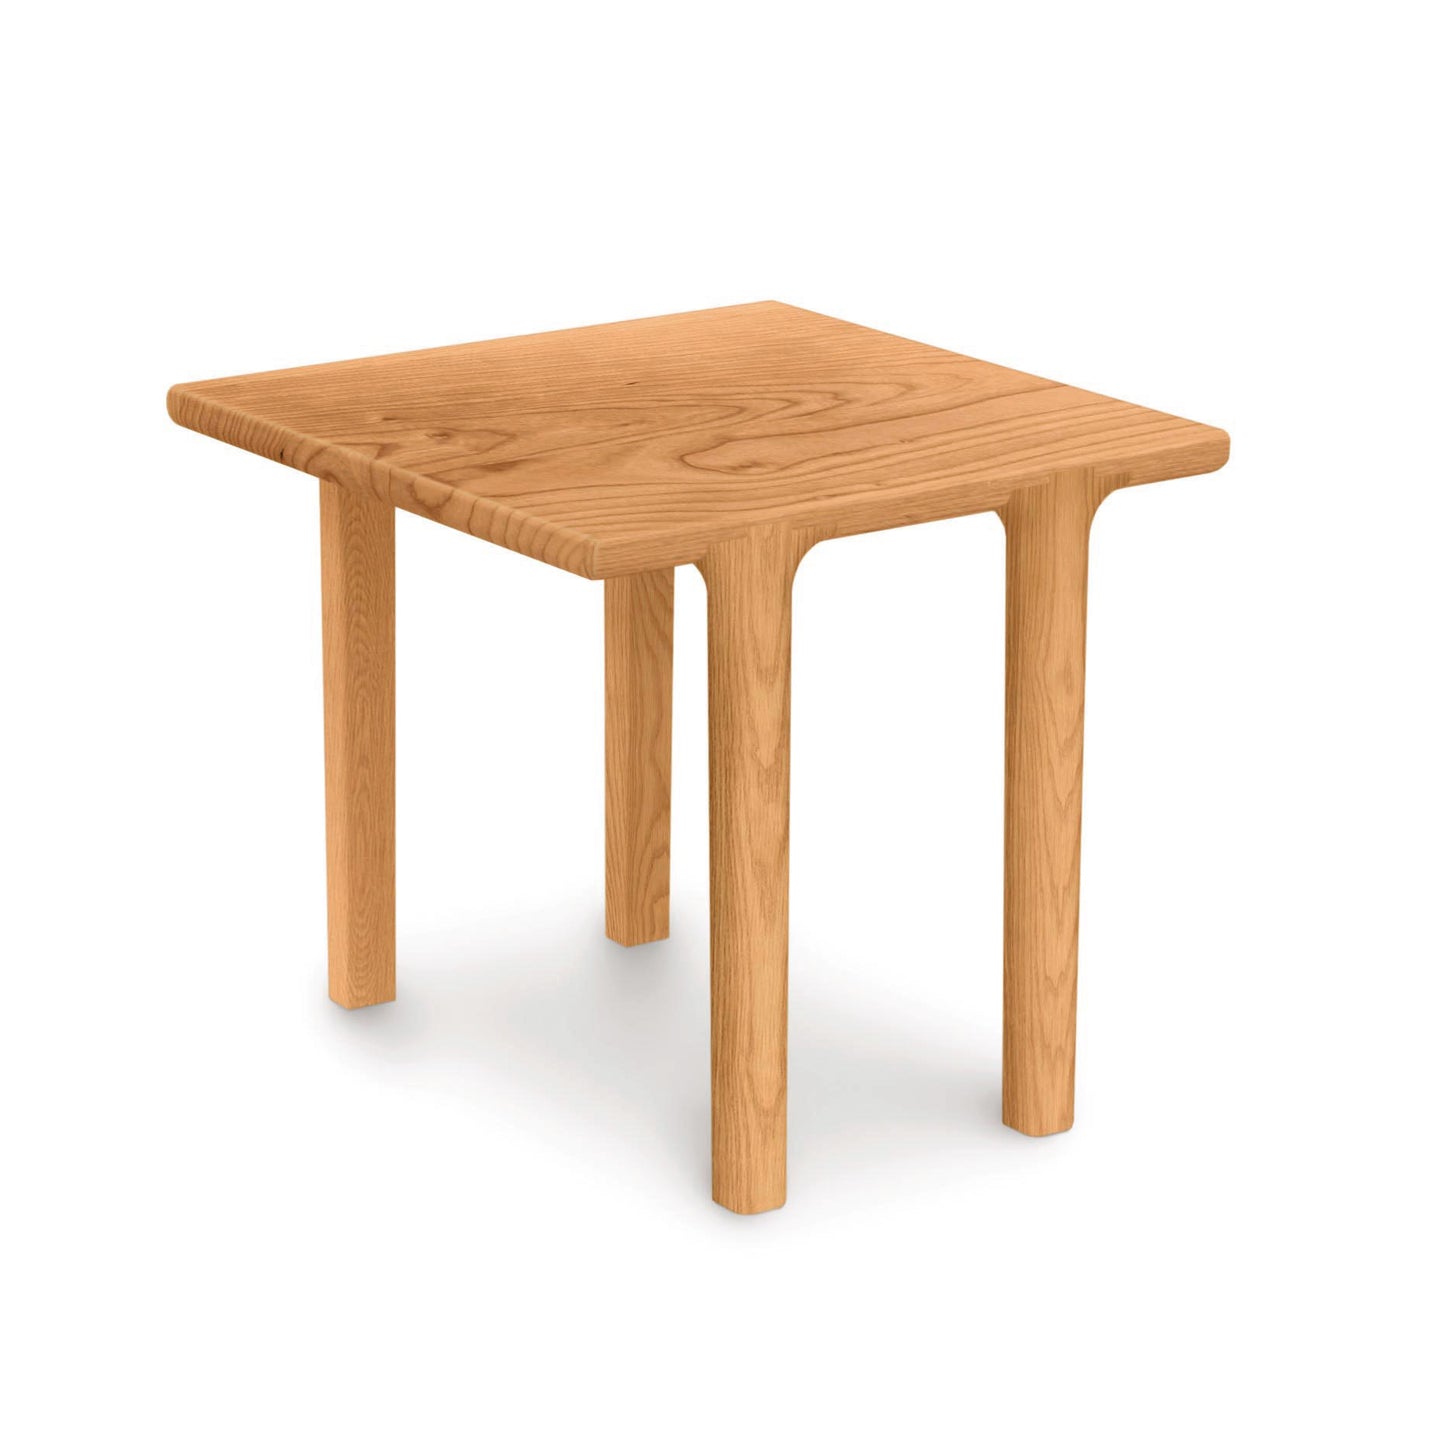 A simple Copeland Furniture Sierra Square End Table with four legs, crafted from solid North American hardwood, displayed on a white background.